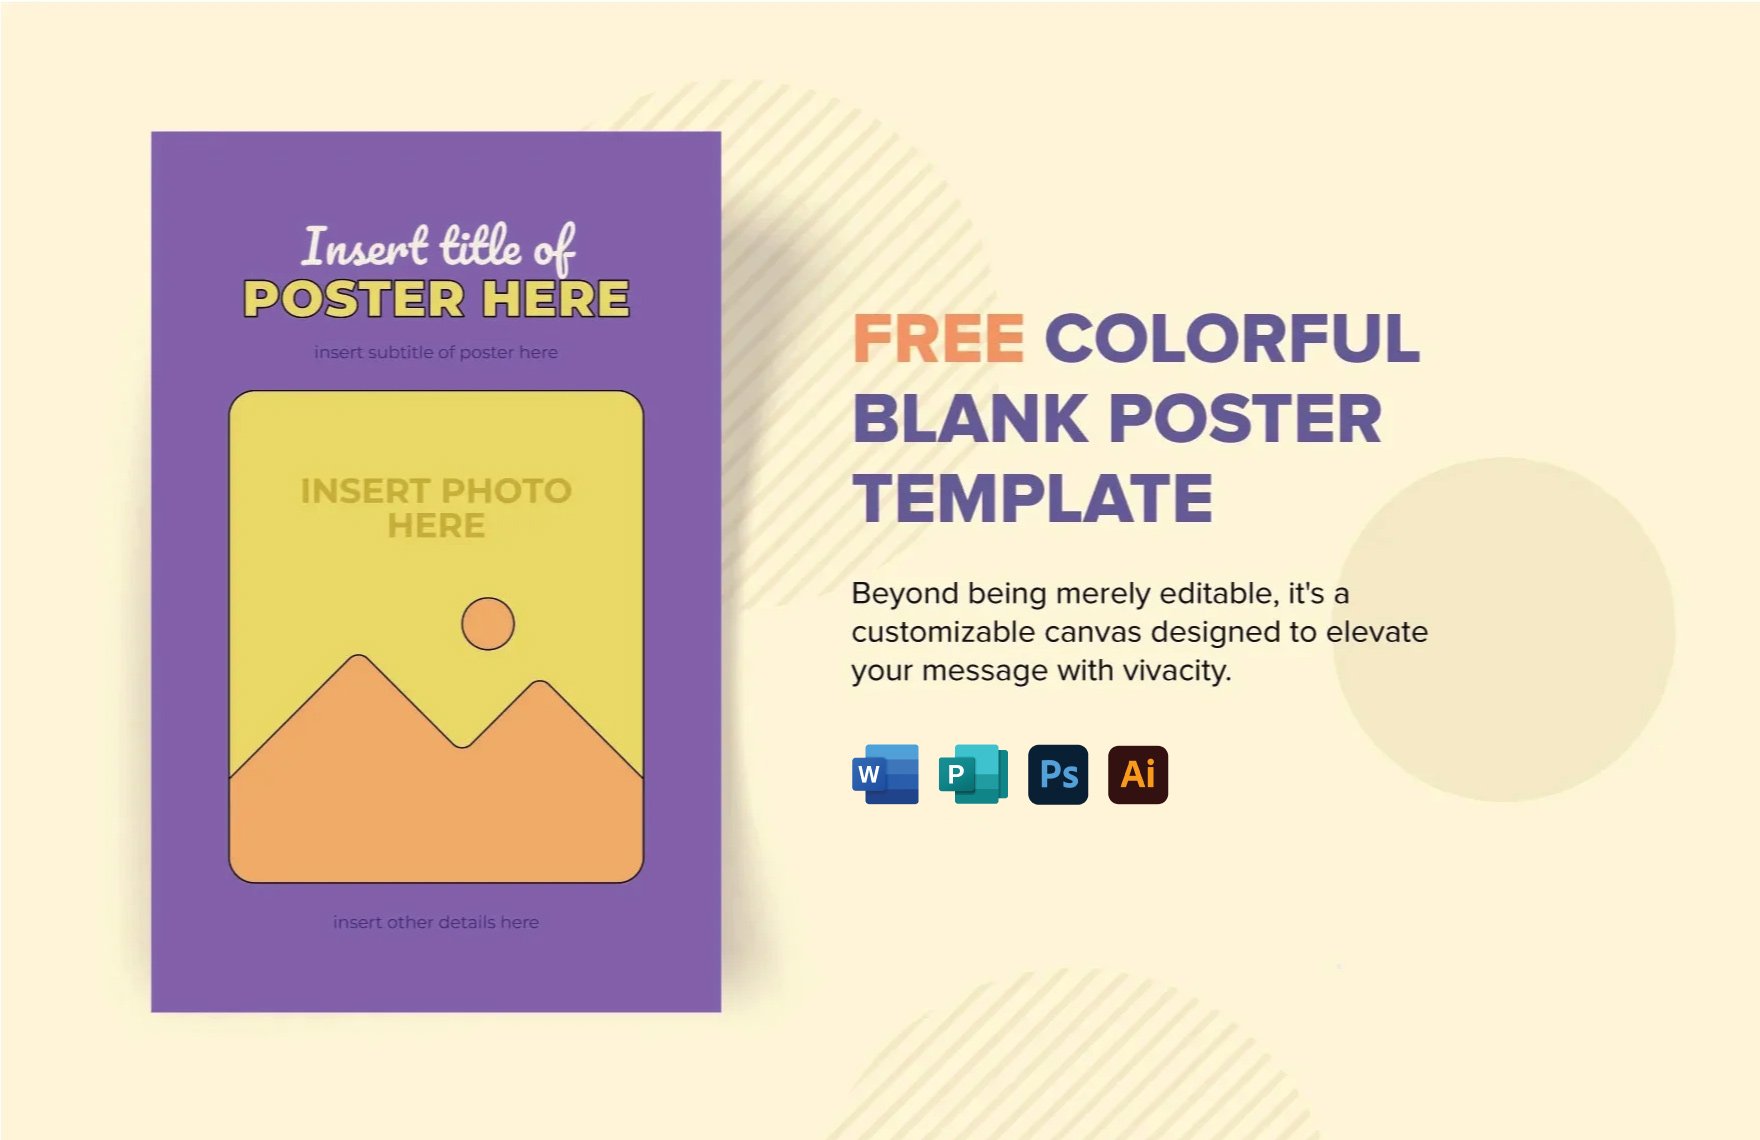 Colorful Blank Poster Template